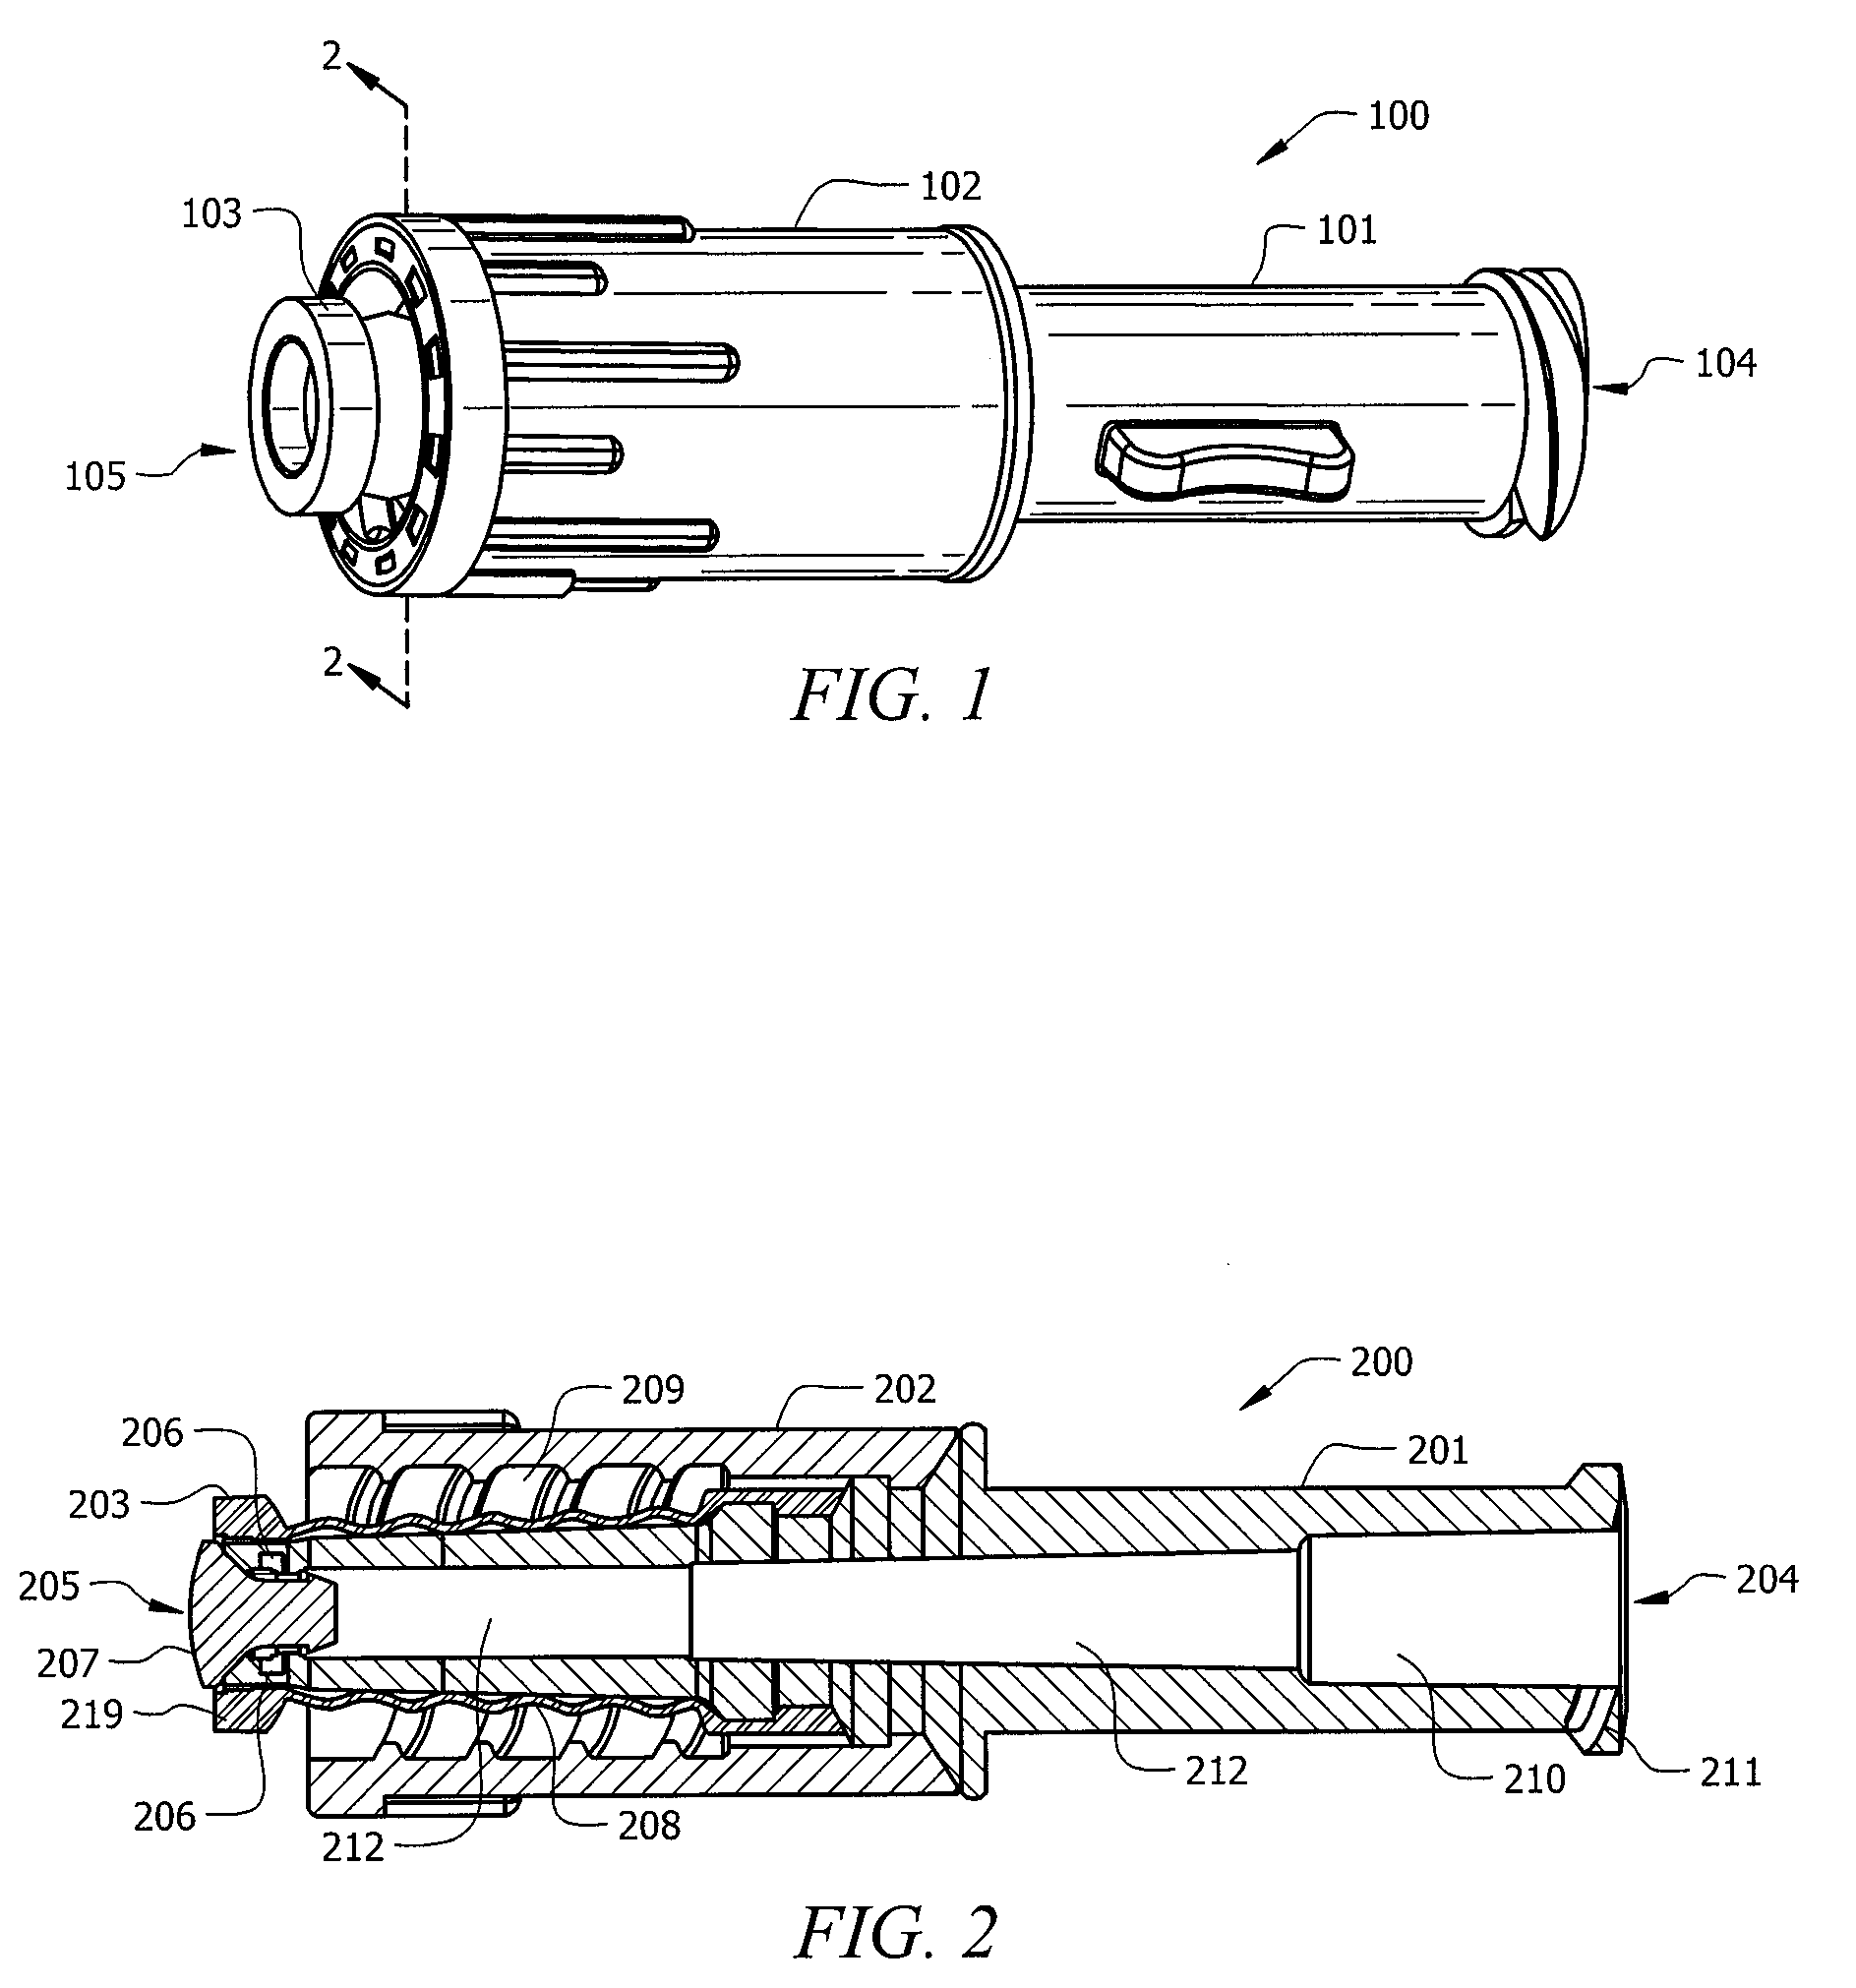 Closed male luer device for minimizing leakage during connection and disconnection